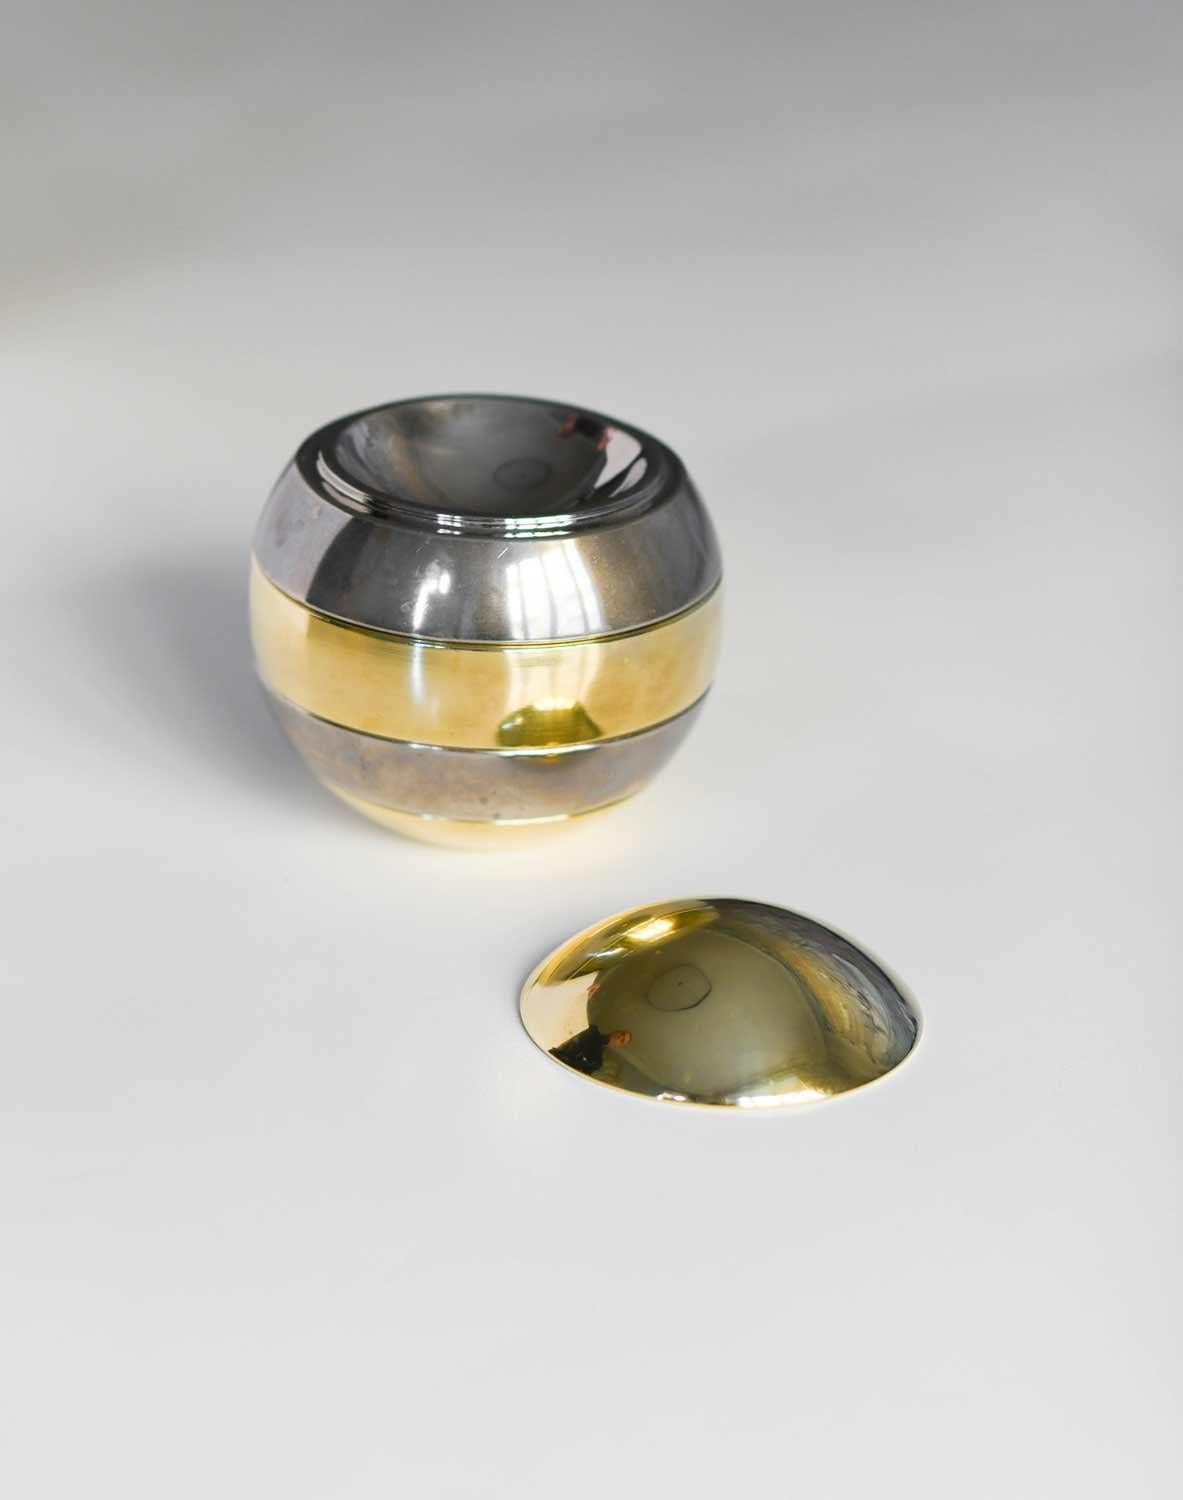 70s ashtray set by Tommaso Barbi in metal and brass.
The product is made up of 5 pieces.